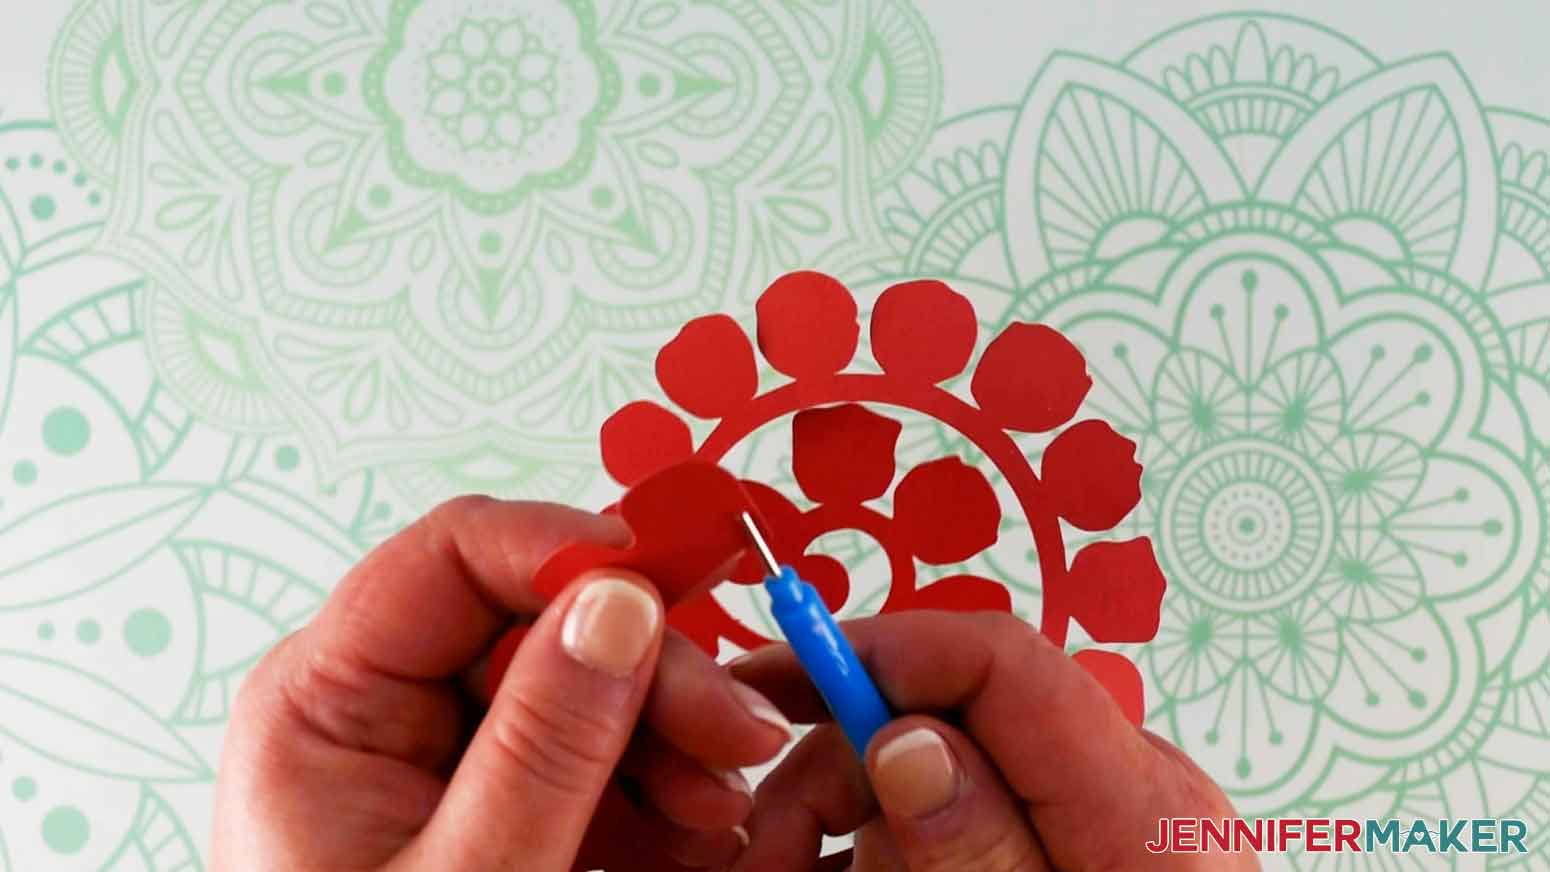 Insert cardstock into the quilling tool for my paper flower shadow box